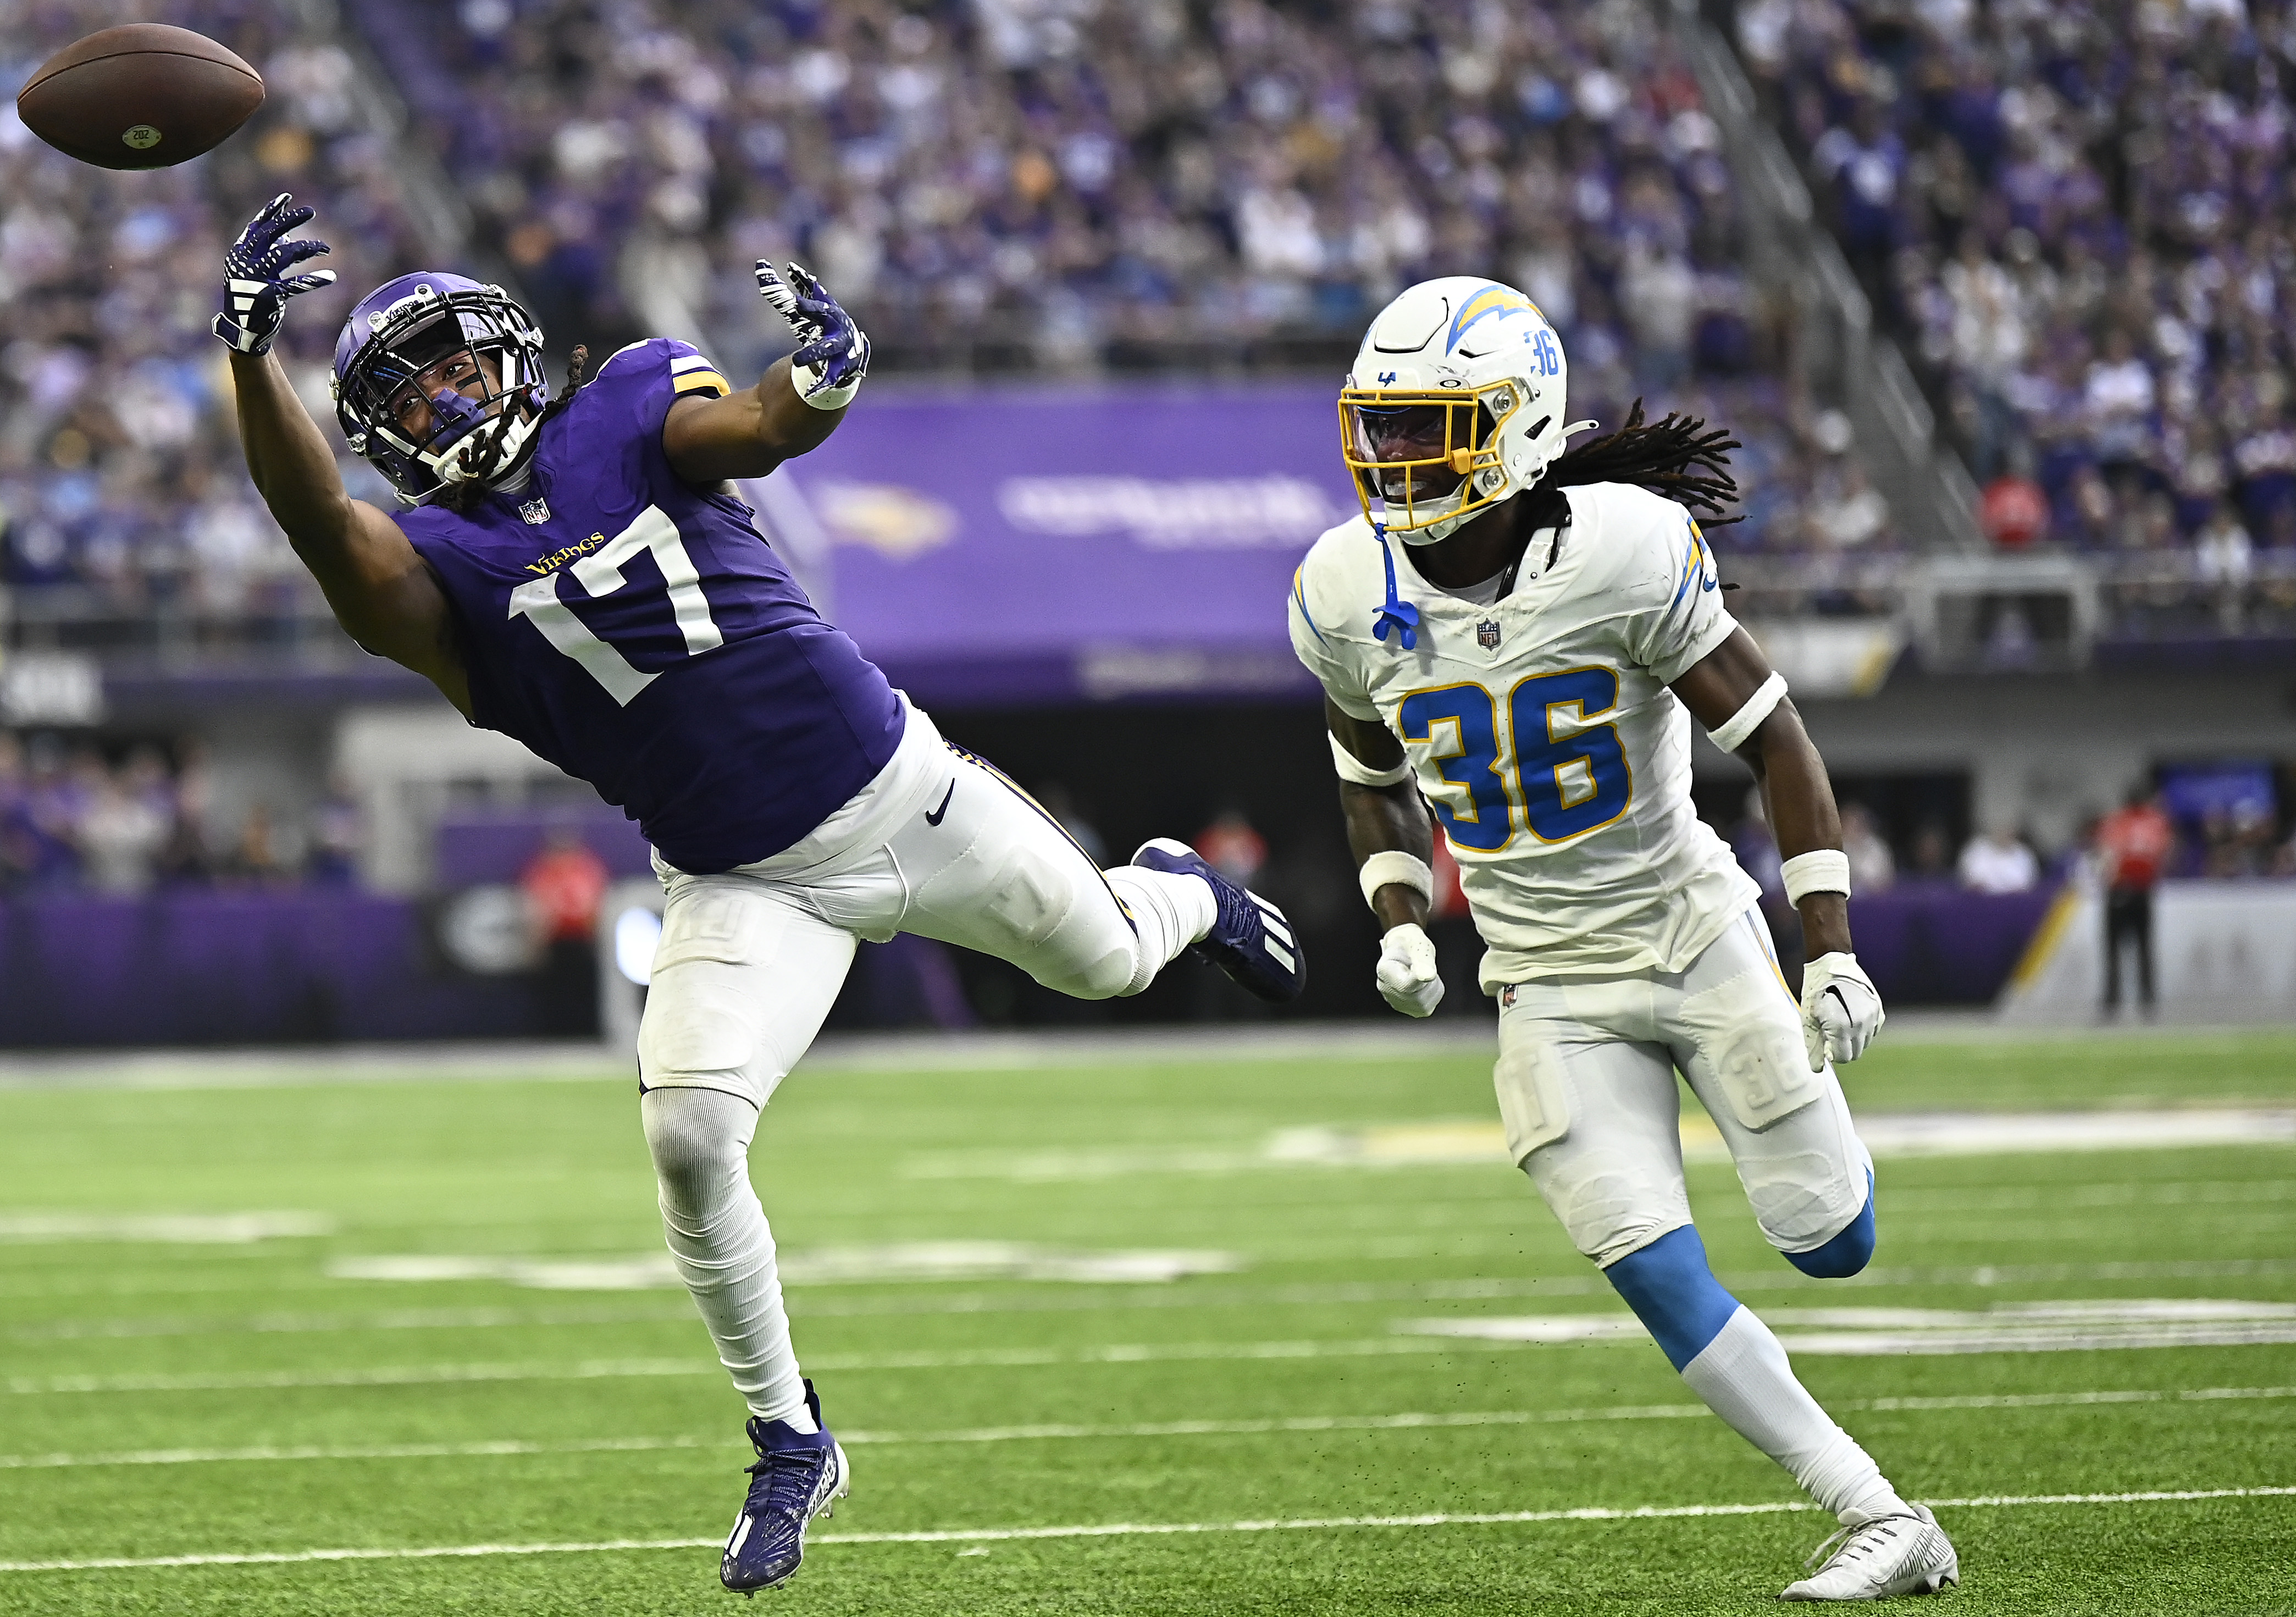 Beleaguered Chargers defense delivers, shuts down Vikings late to